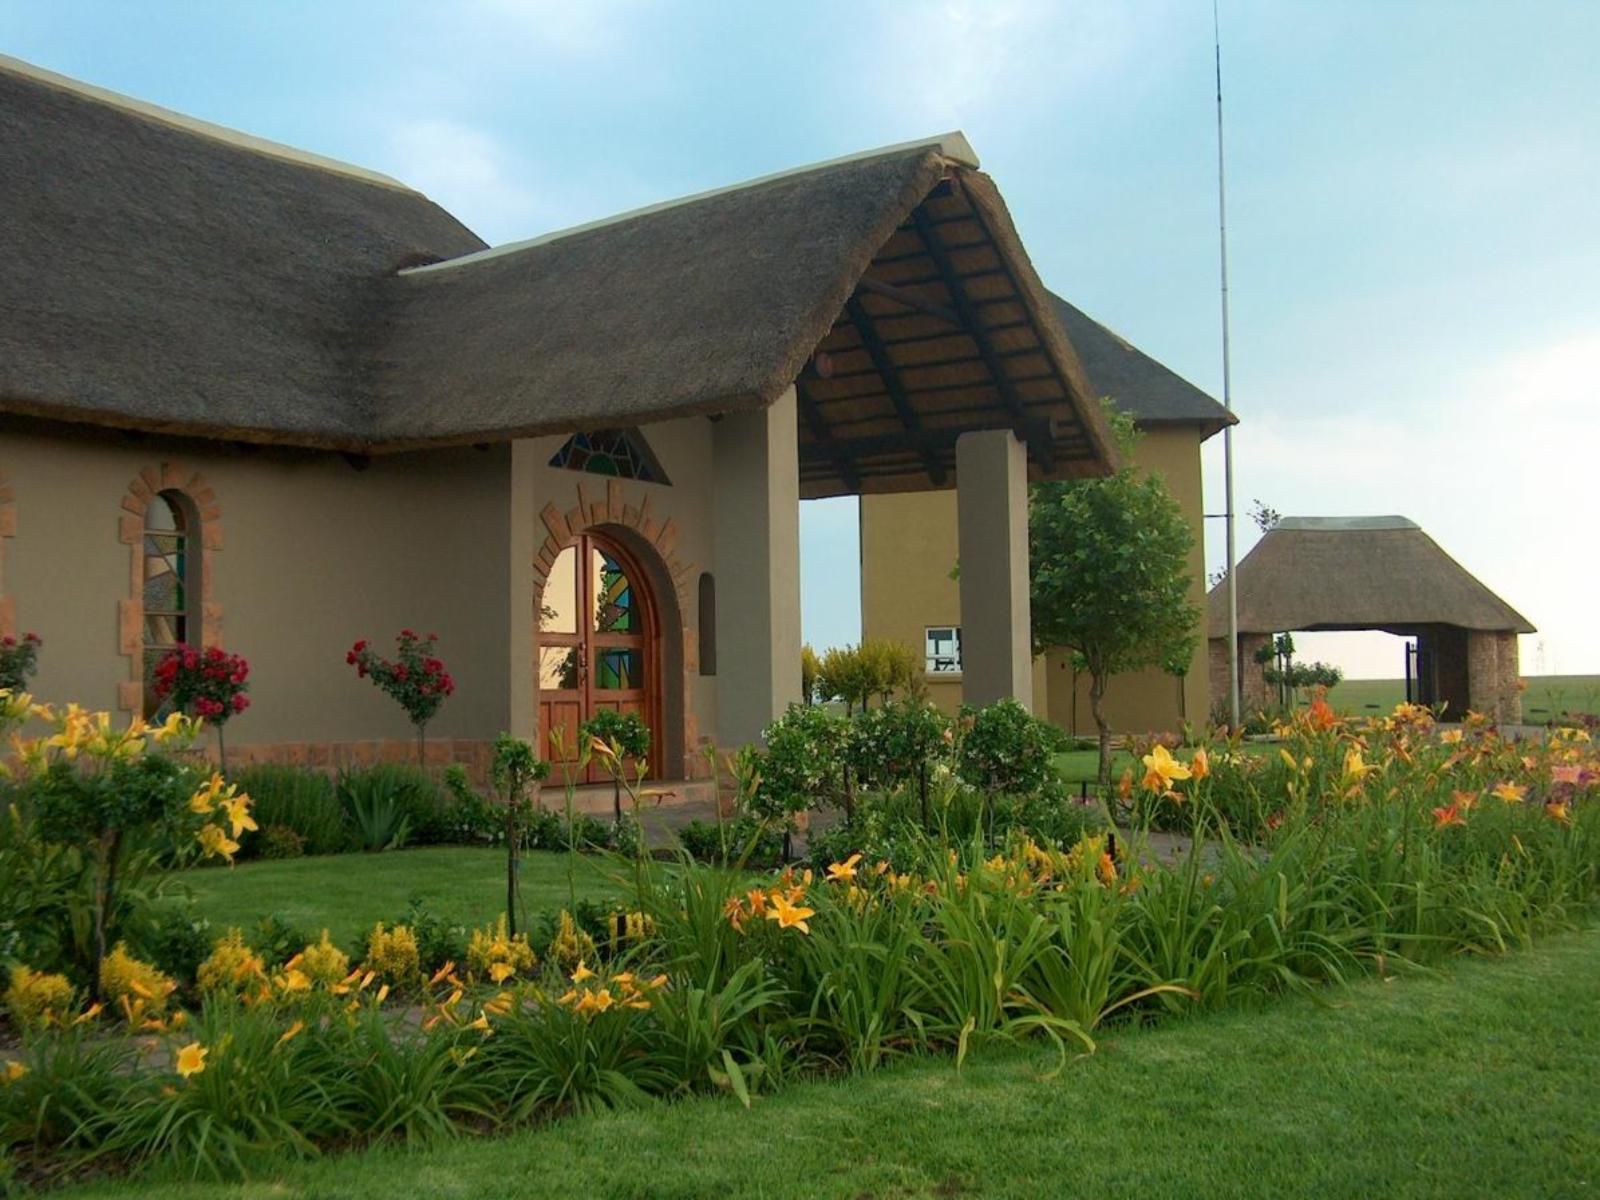 Grasslands Conference And Wedding Venue Bethal Mpumalanga South Africa Complementary Colors, House, Building, Architecture